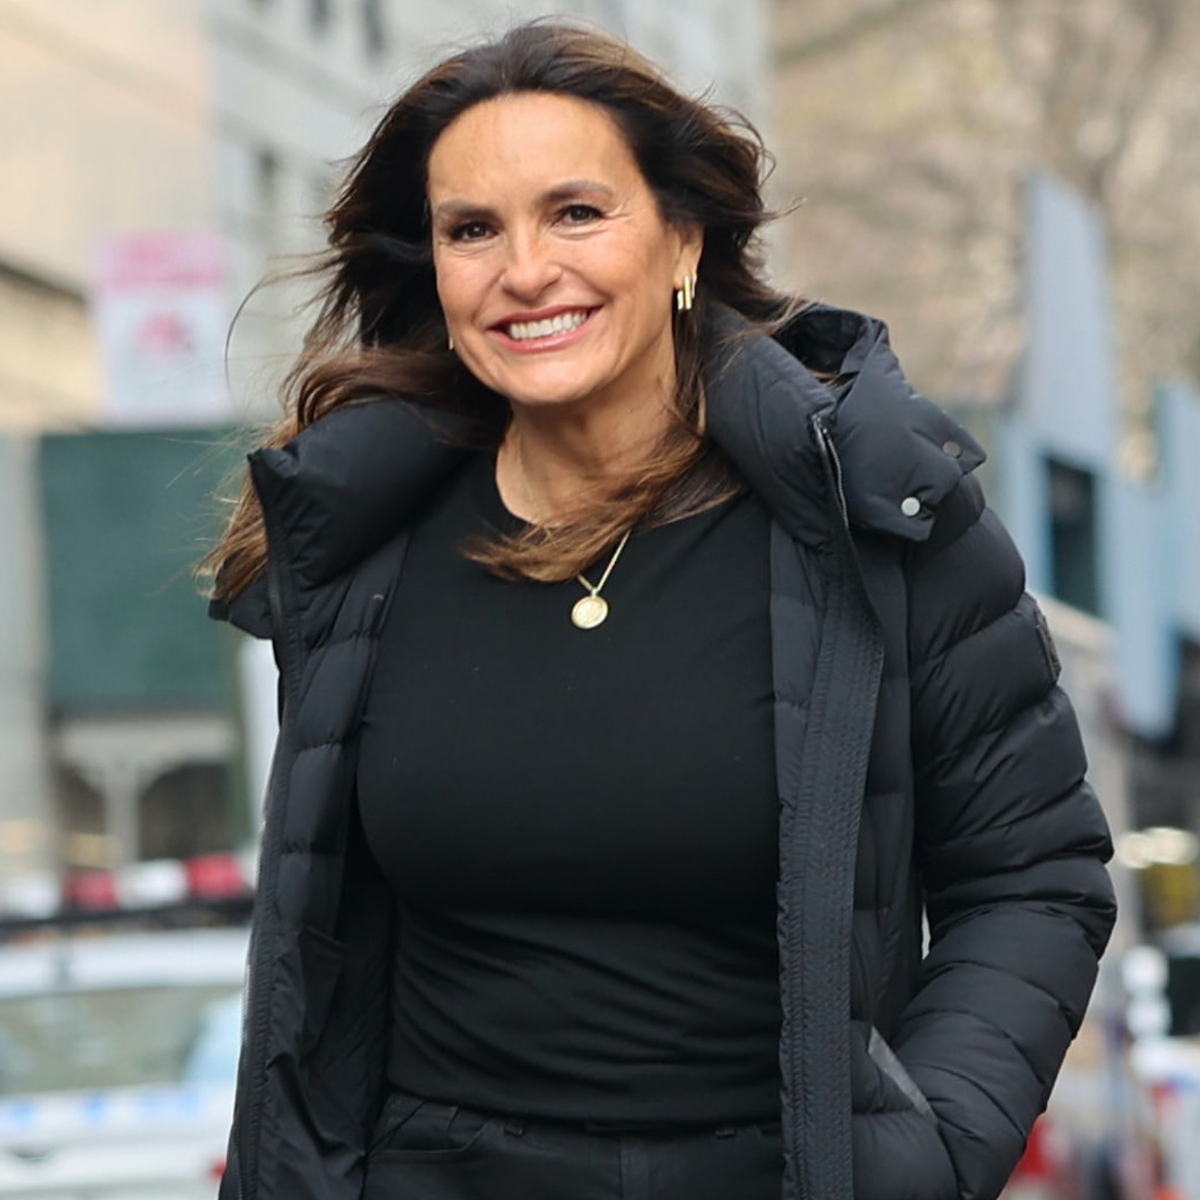 Mariska Hargitay Helps Little Girl Reunite With Mom After She's Mistaken for Real-Life Cop